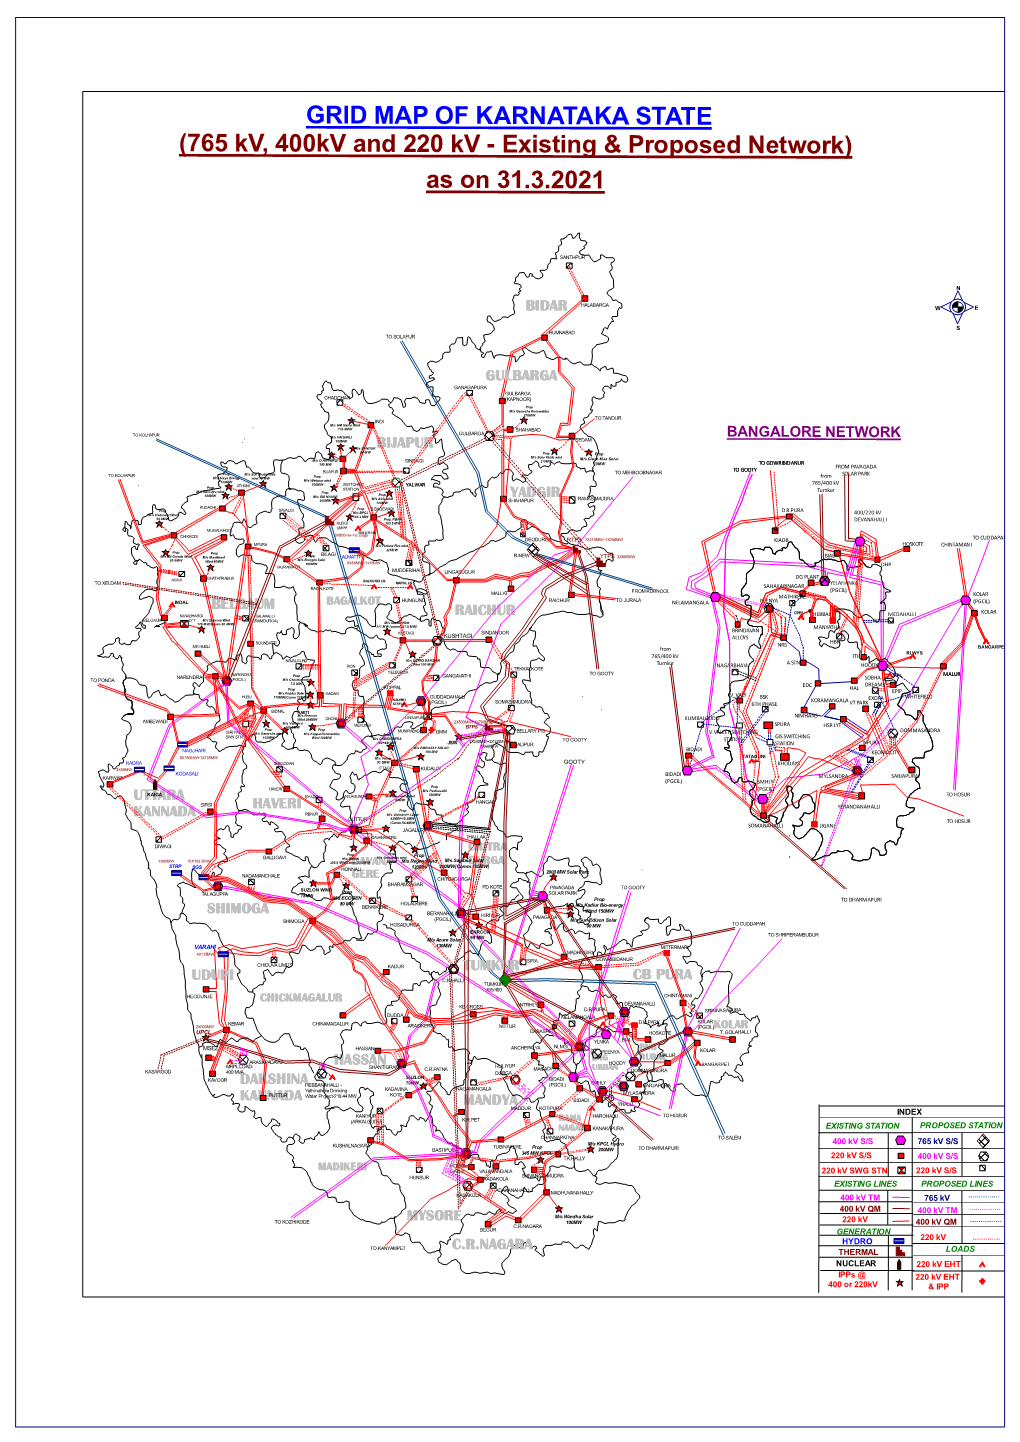 (765 Kv, 400Kv and 220 Kv - Existing & Proposed Network) As on 31.3.2021